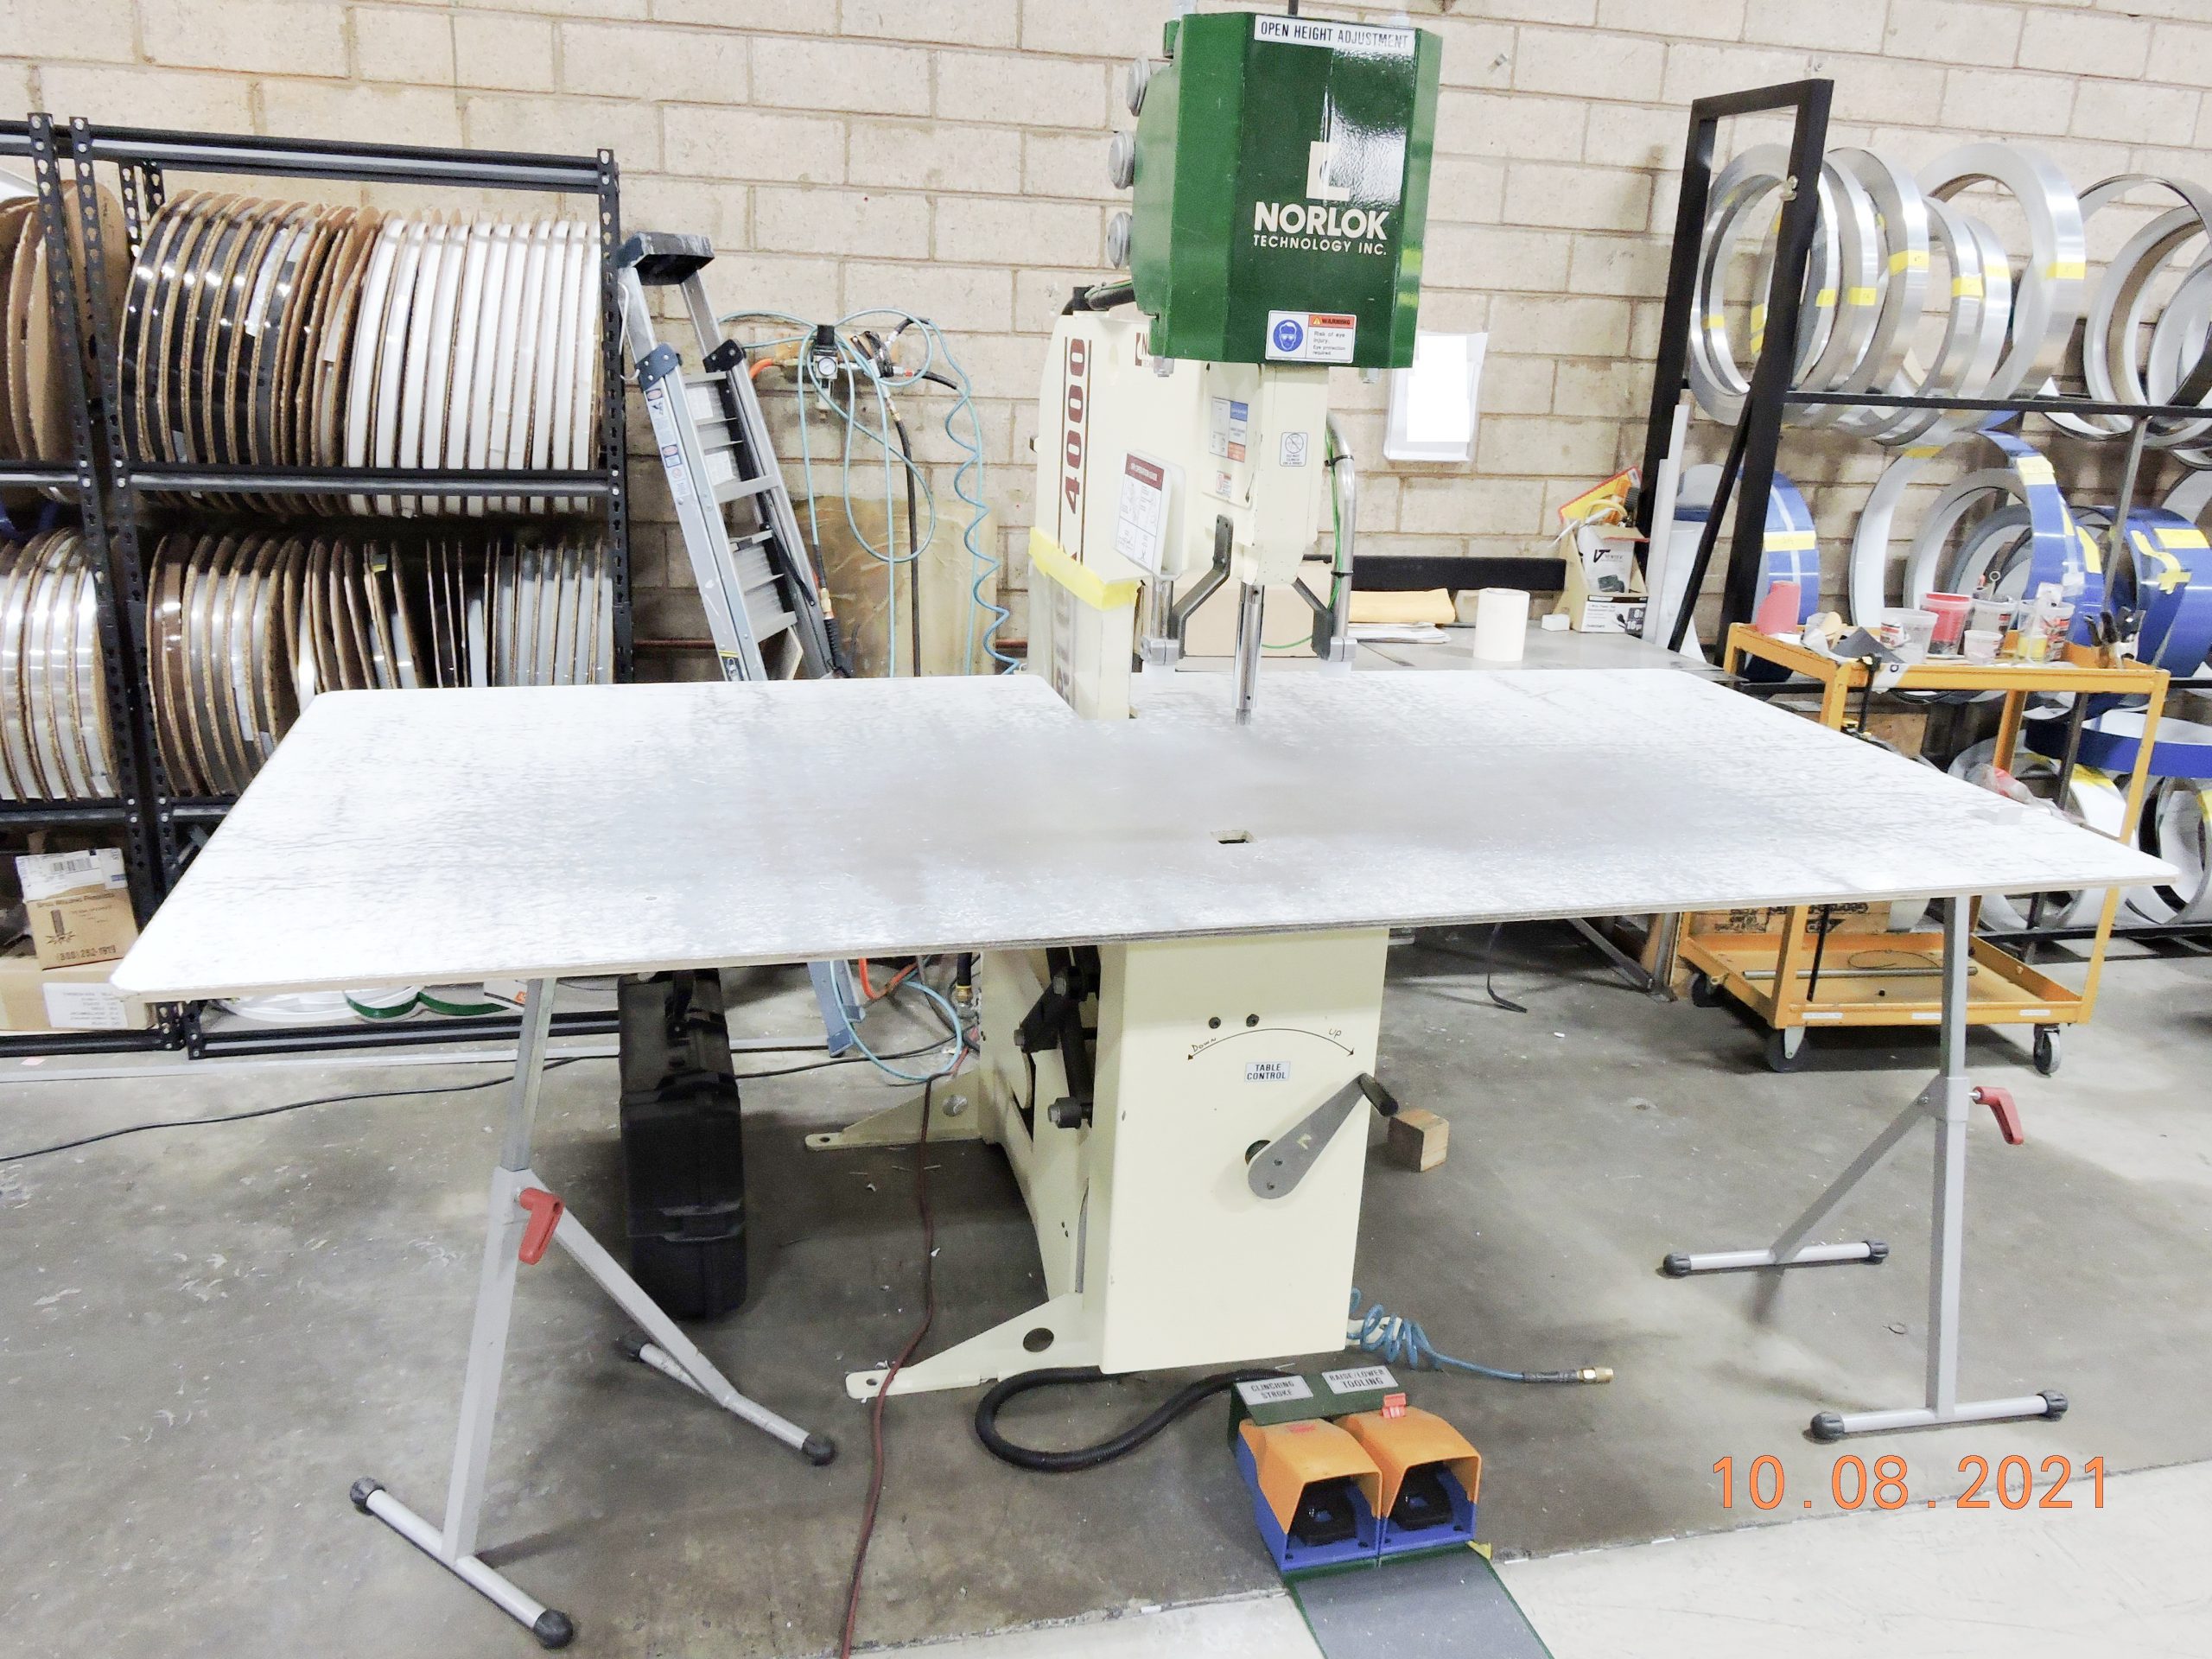 Equipment Lot: HS – 25 Series CNC Router, Fusion Automatic Channel Letter Machine, Letter Lok 4000 Machine & Supplies (used) Item # UE-120221A (California)